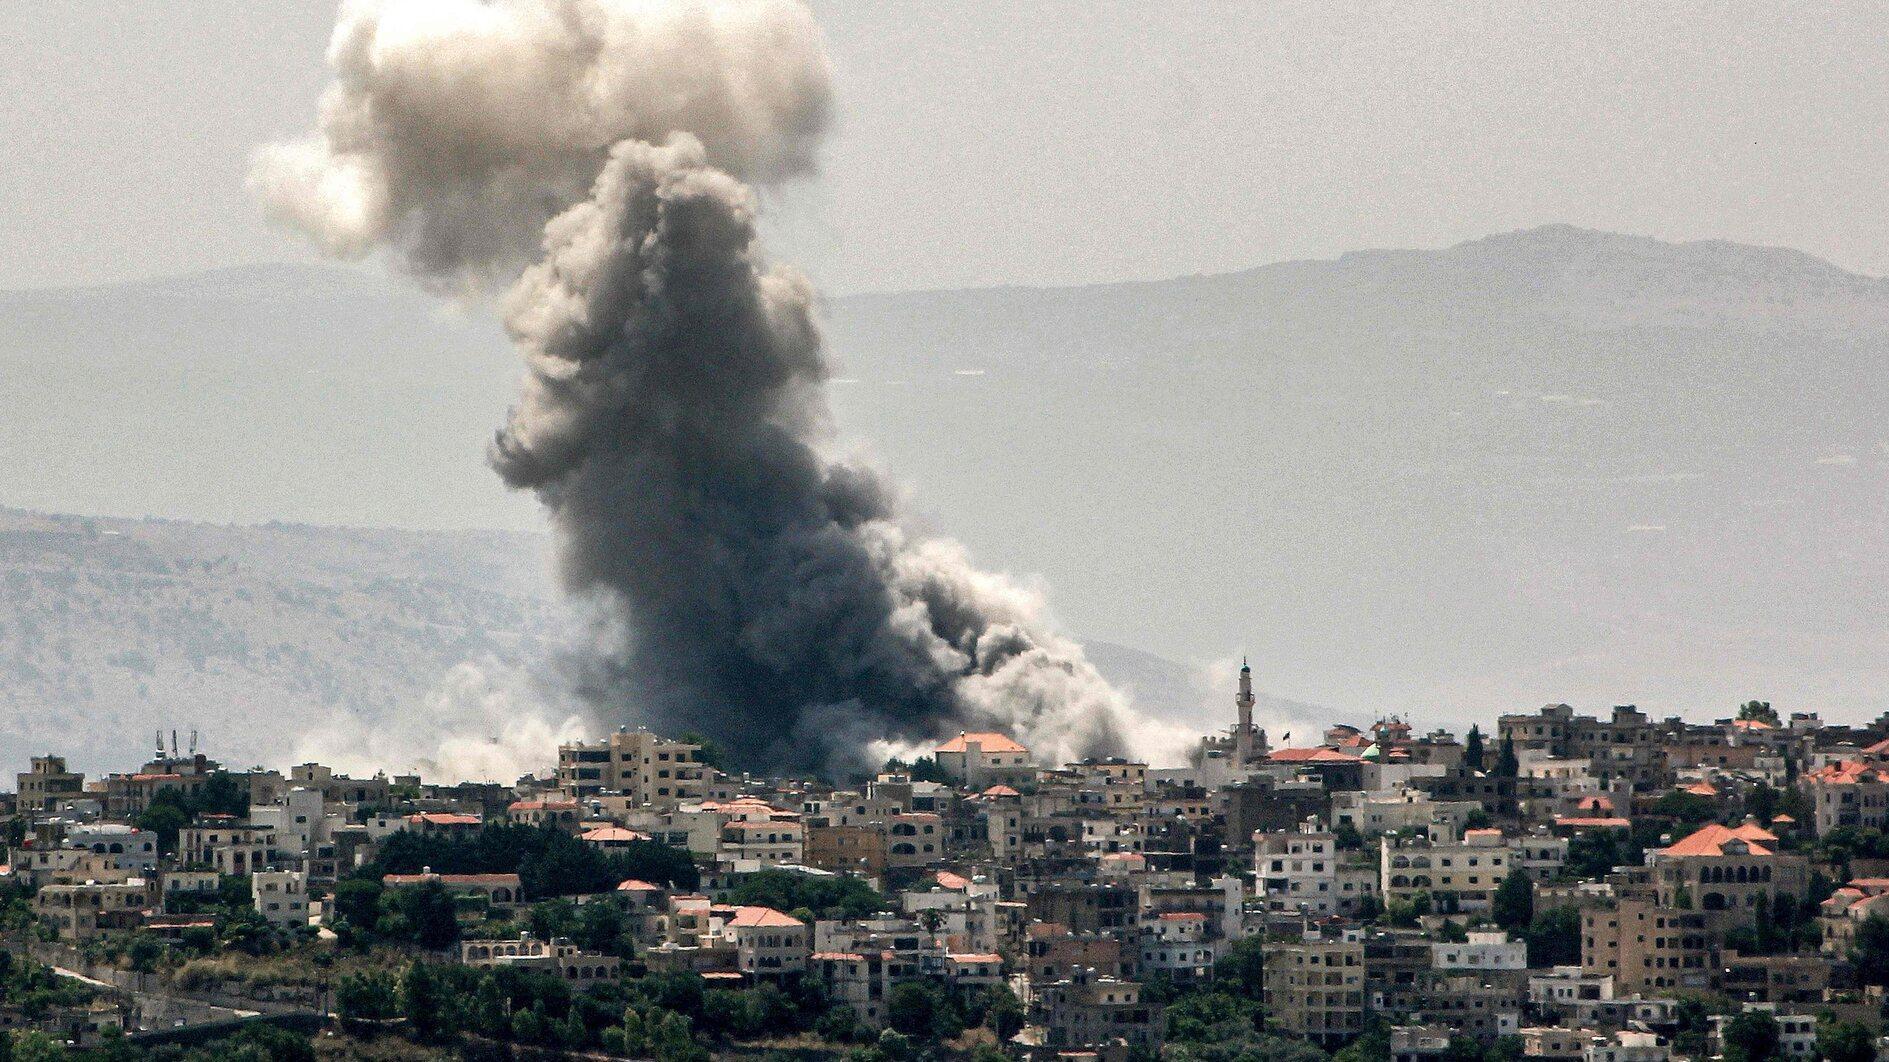 UN: Israeli use of heavy bombs raises serious concerns about laws of war